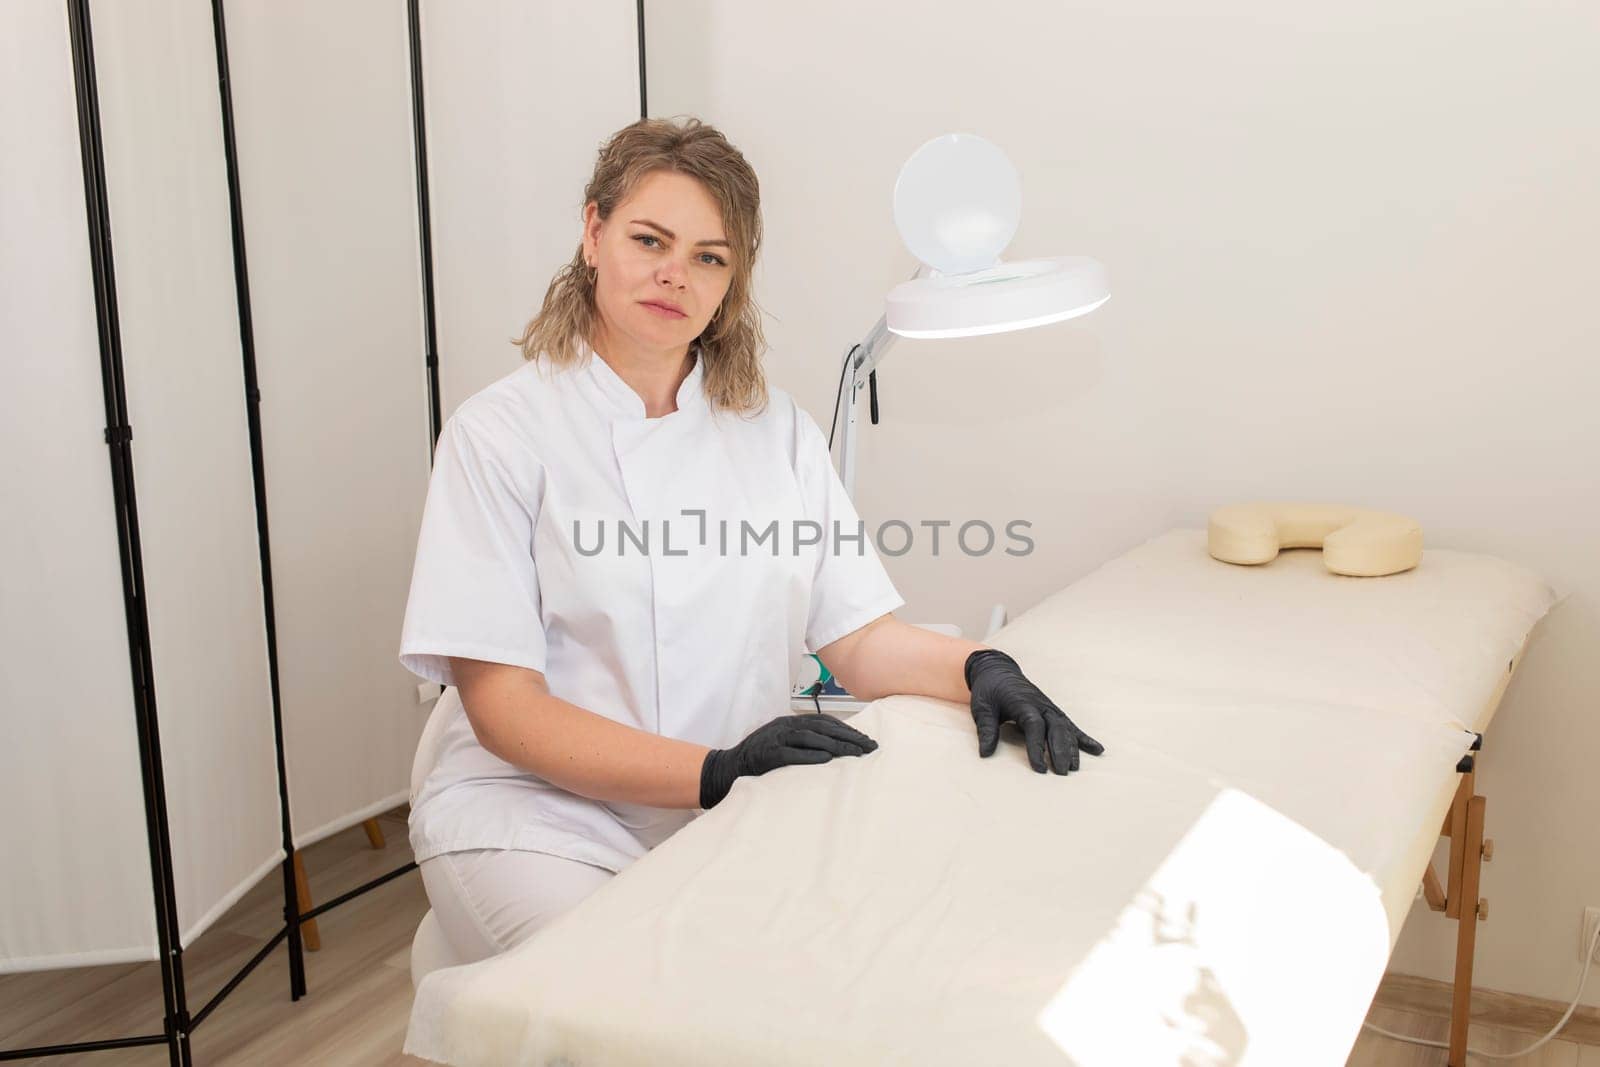 Portrait Of Electrologist, Smiling Beauty Specialist Looking At Camera In Beauty Salon. Authentic Photo Of Aesthetic Specialist Providing Skin Care Services. High quality photo. Horizontal Plane.